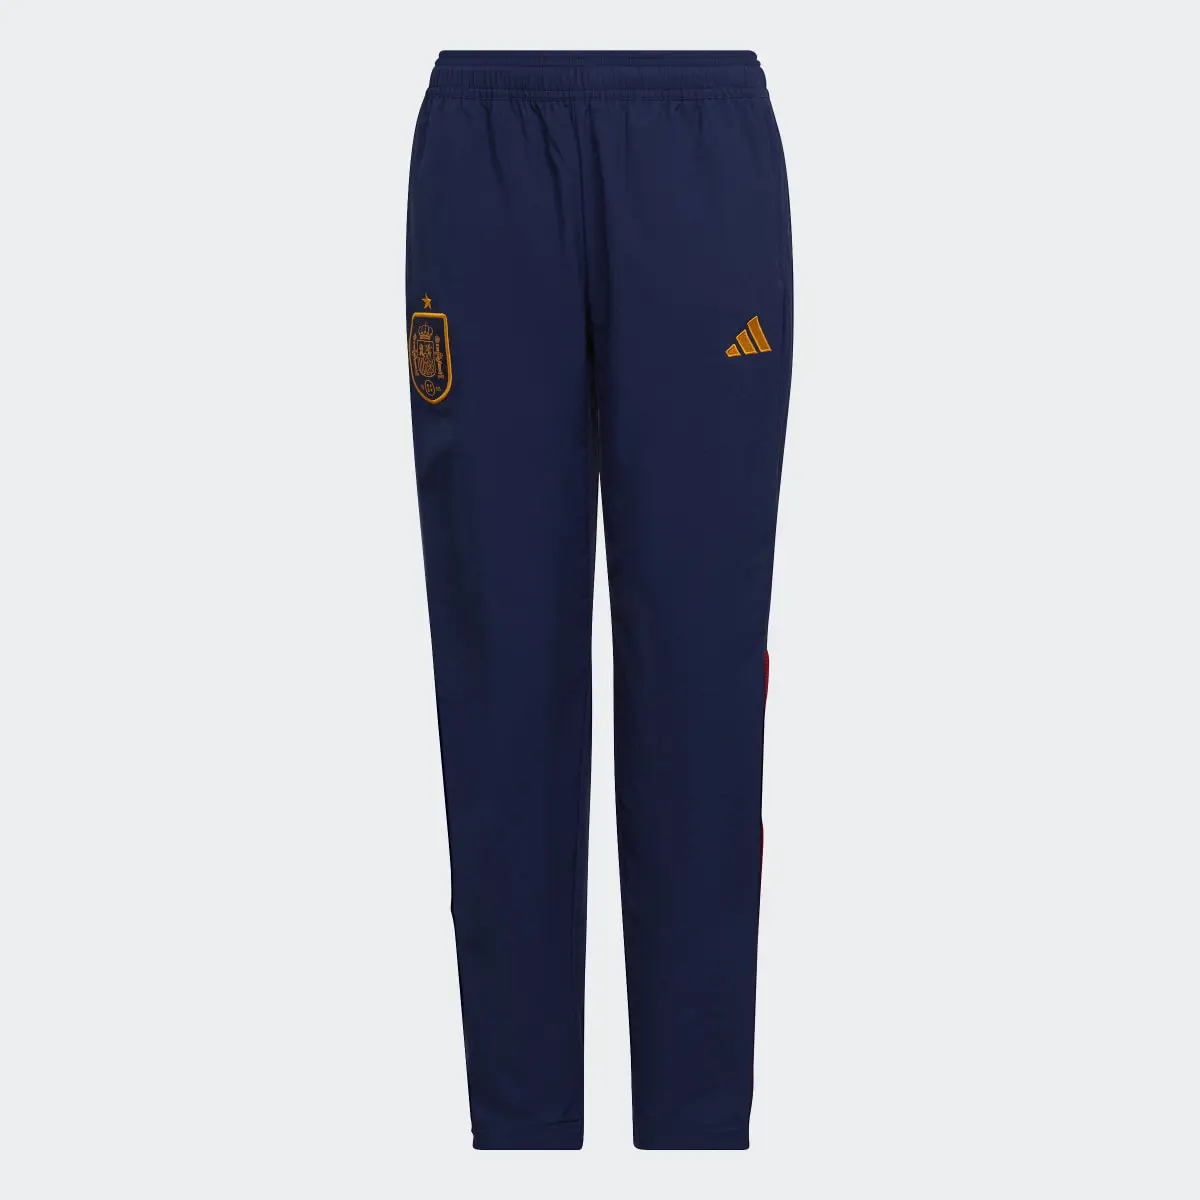 Adidas Spain Travel Tracksuit Bottoms. 1